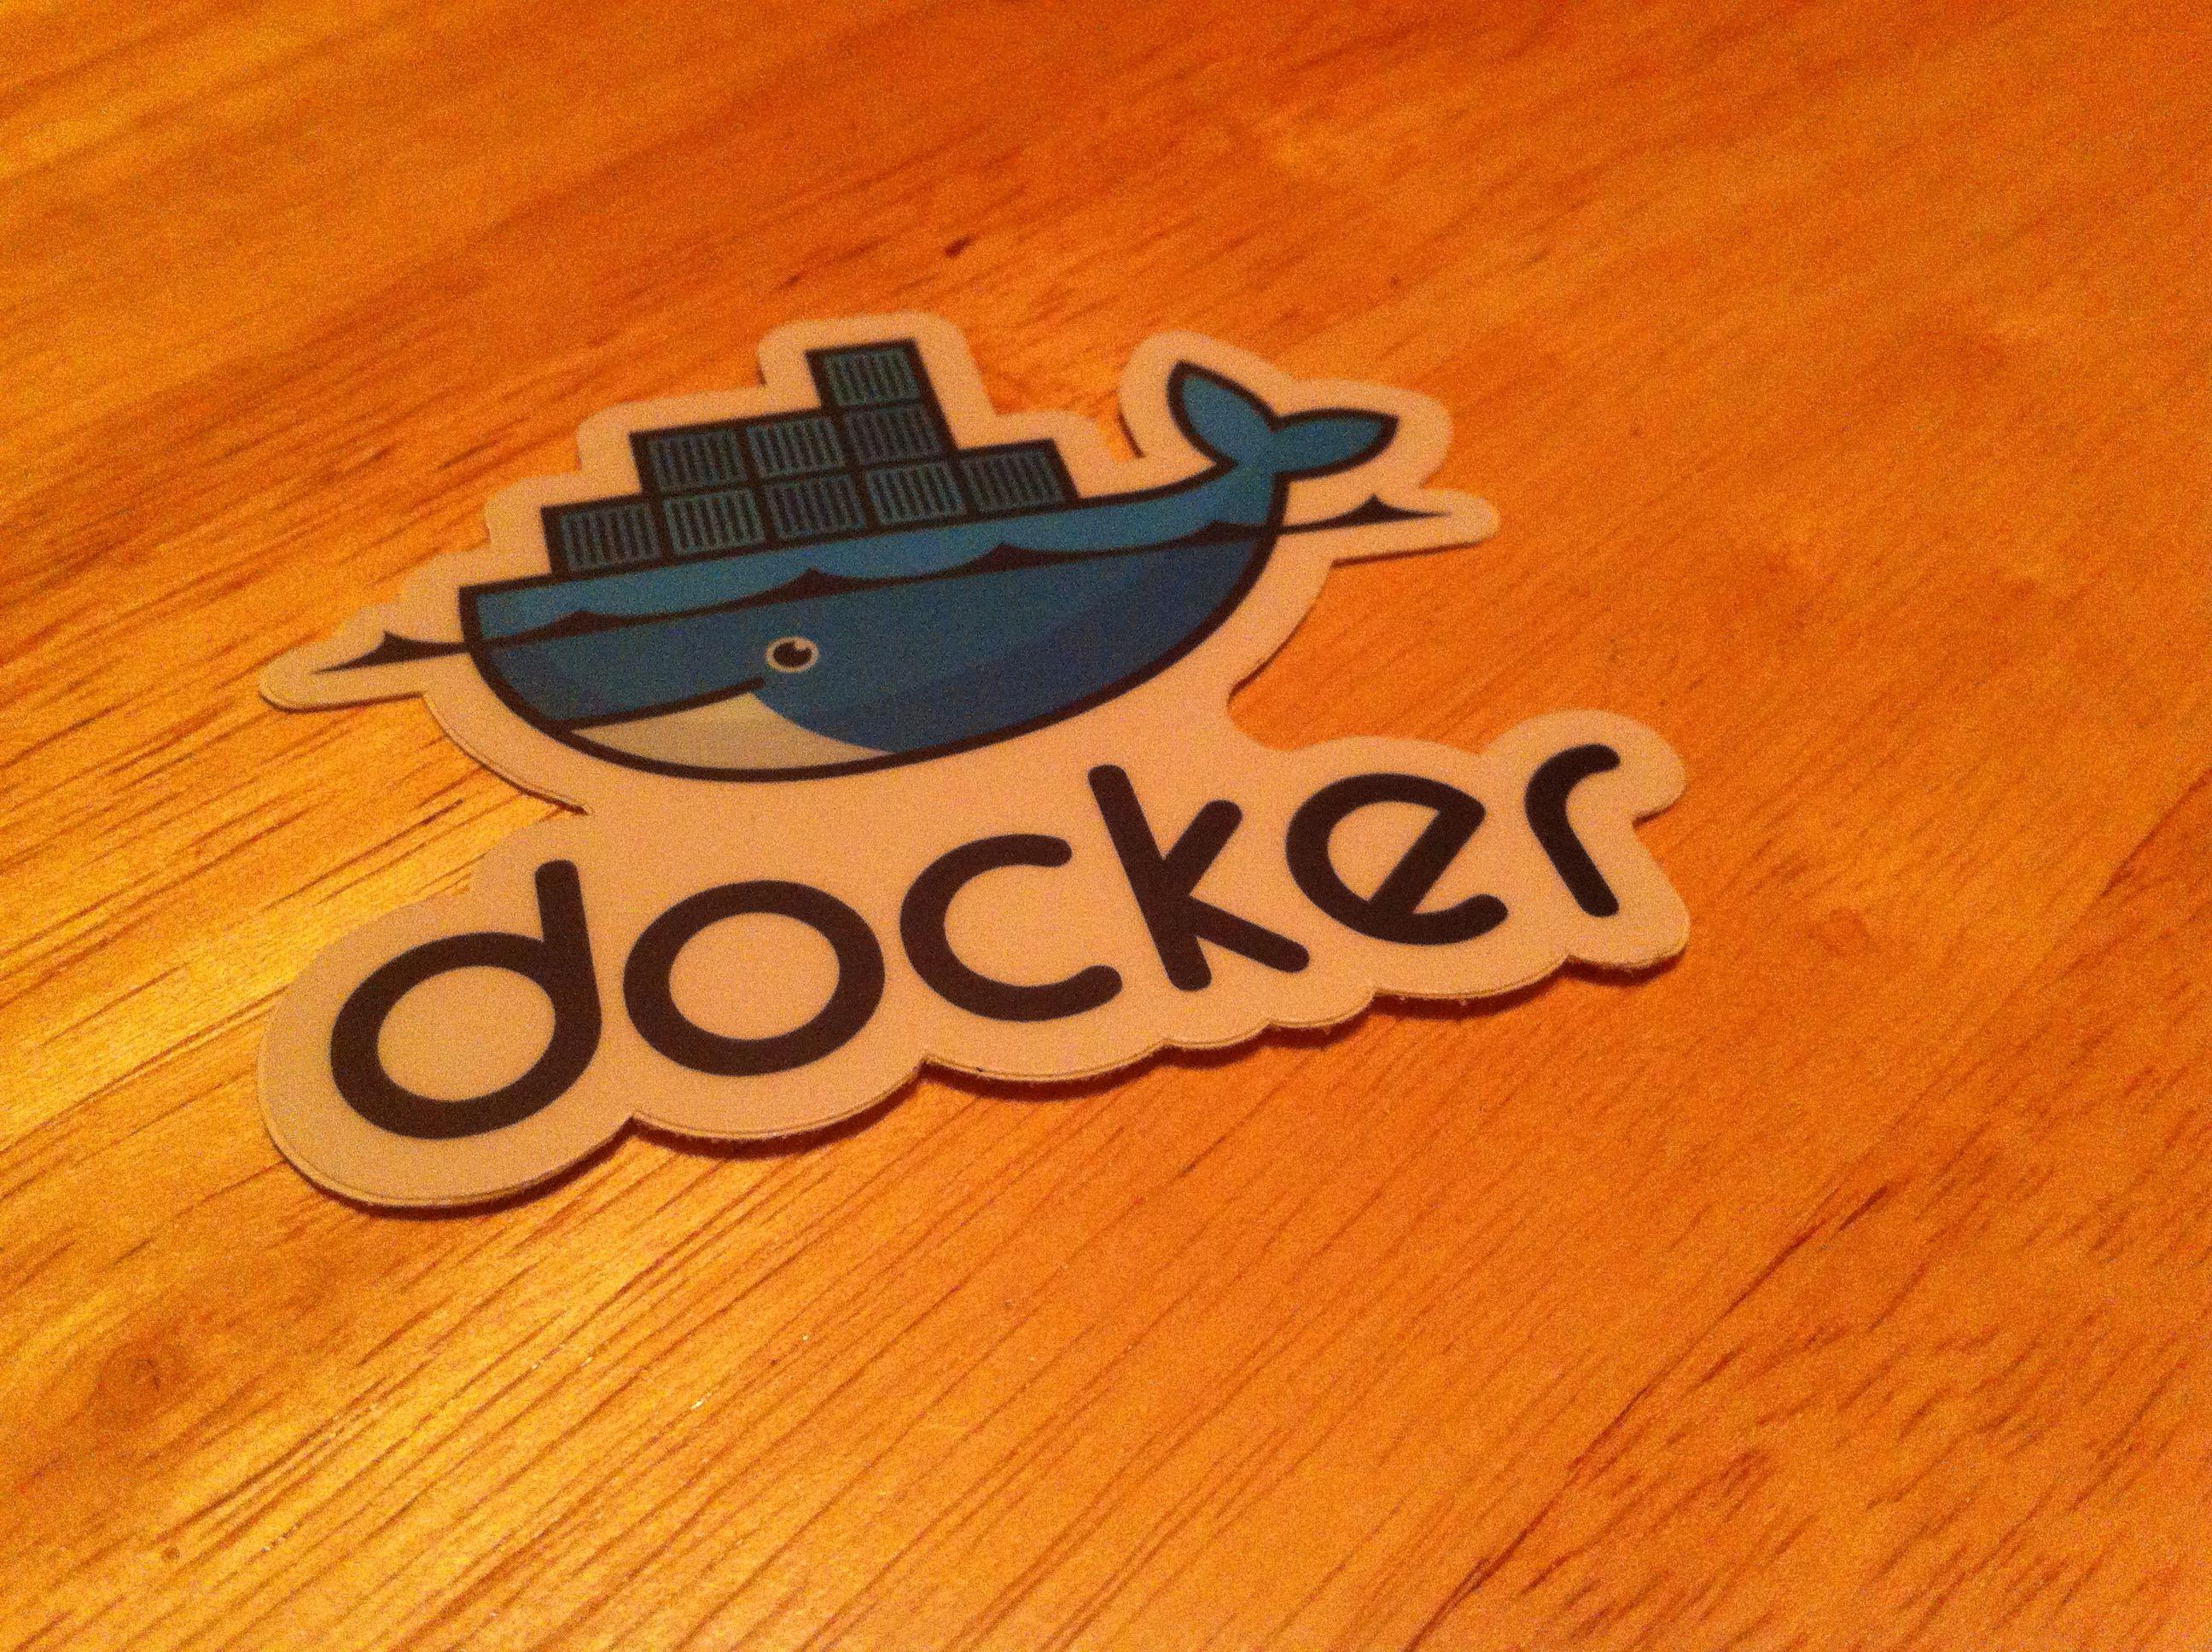 Docker Logo - Docker, now valued at $1B, paid someone $799 for its logo